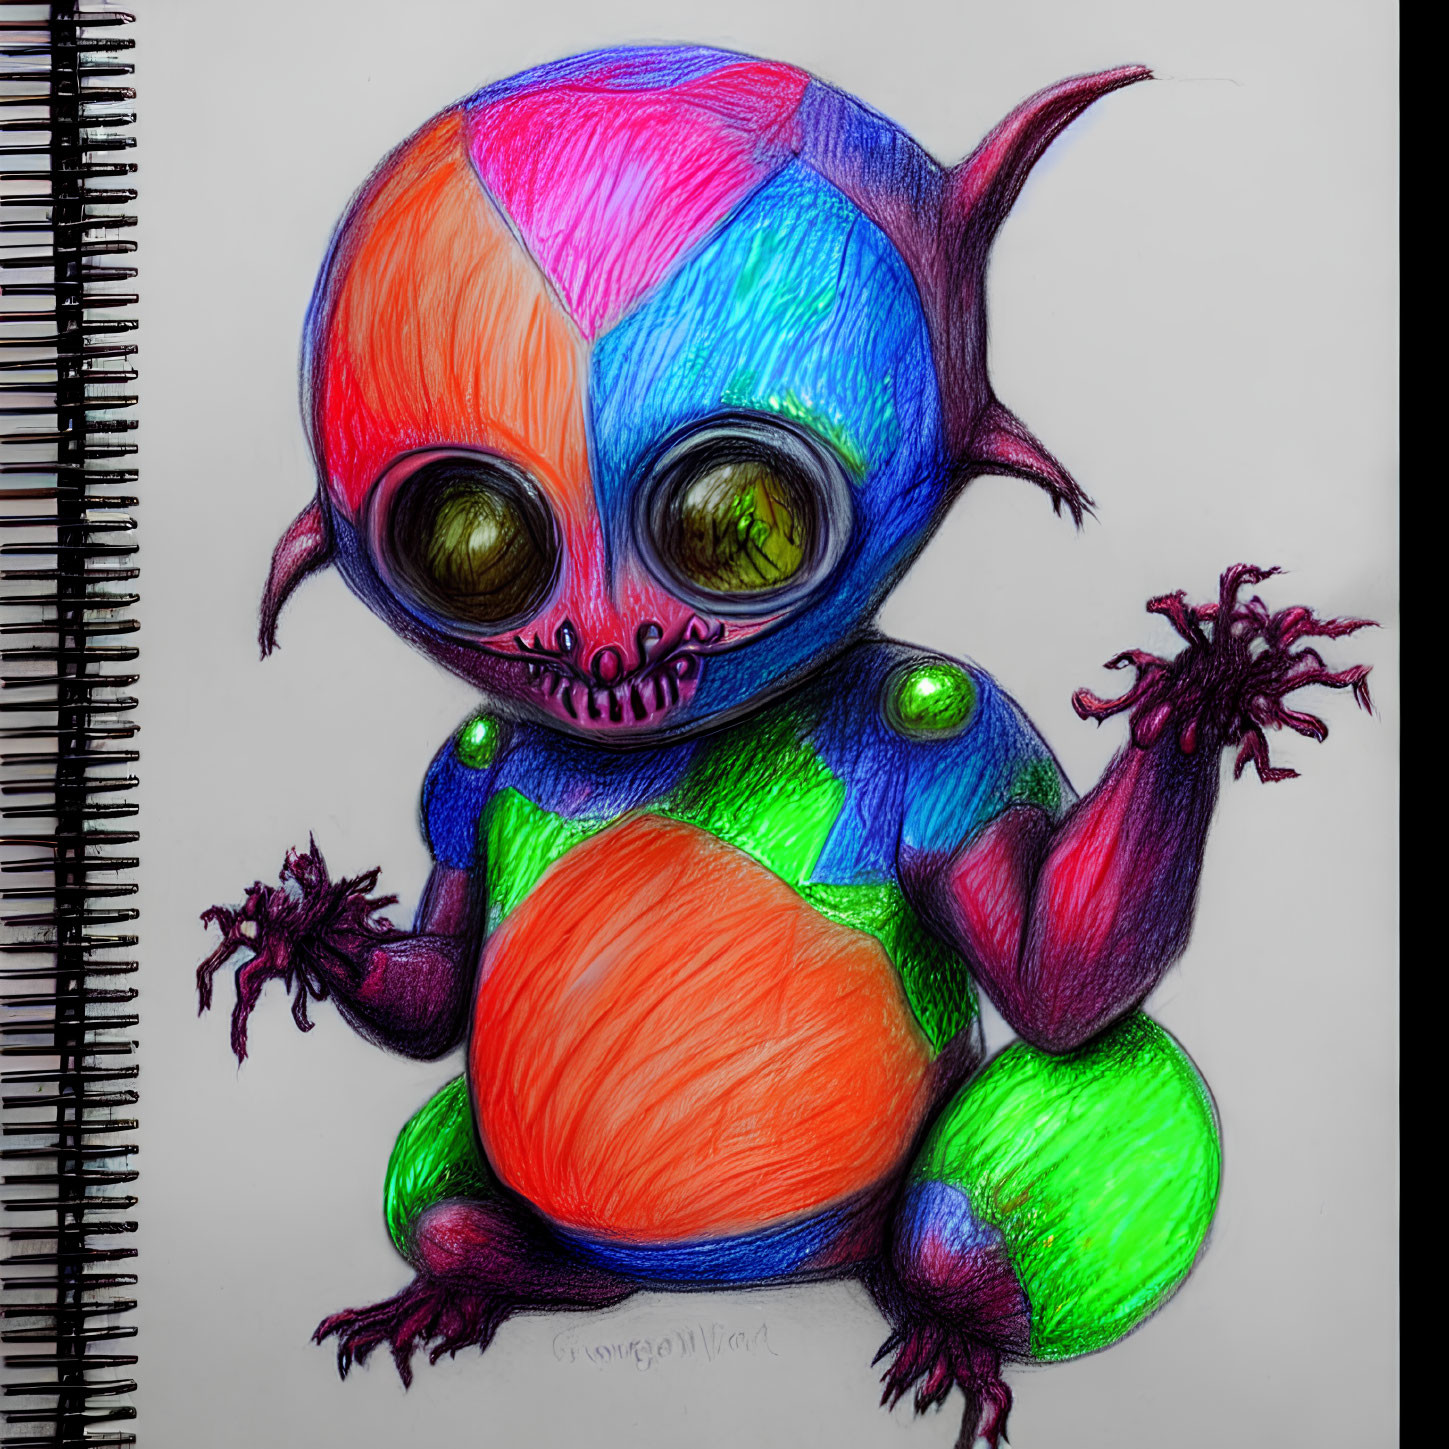 Vibrant alien creature with big eyes and tentacle-like fingers next to spiral notebook